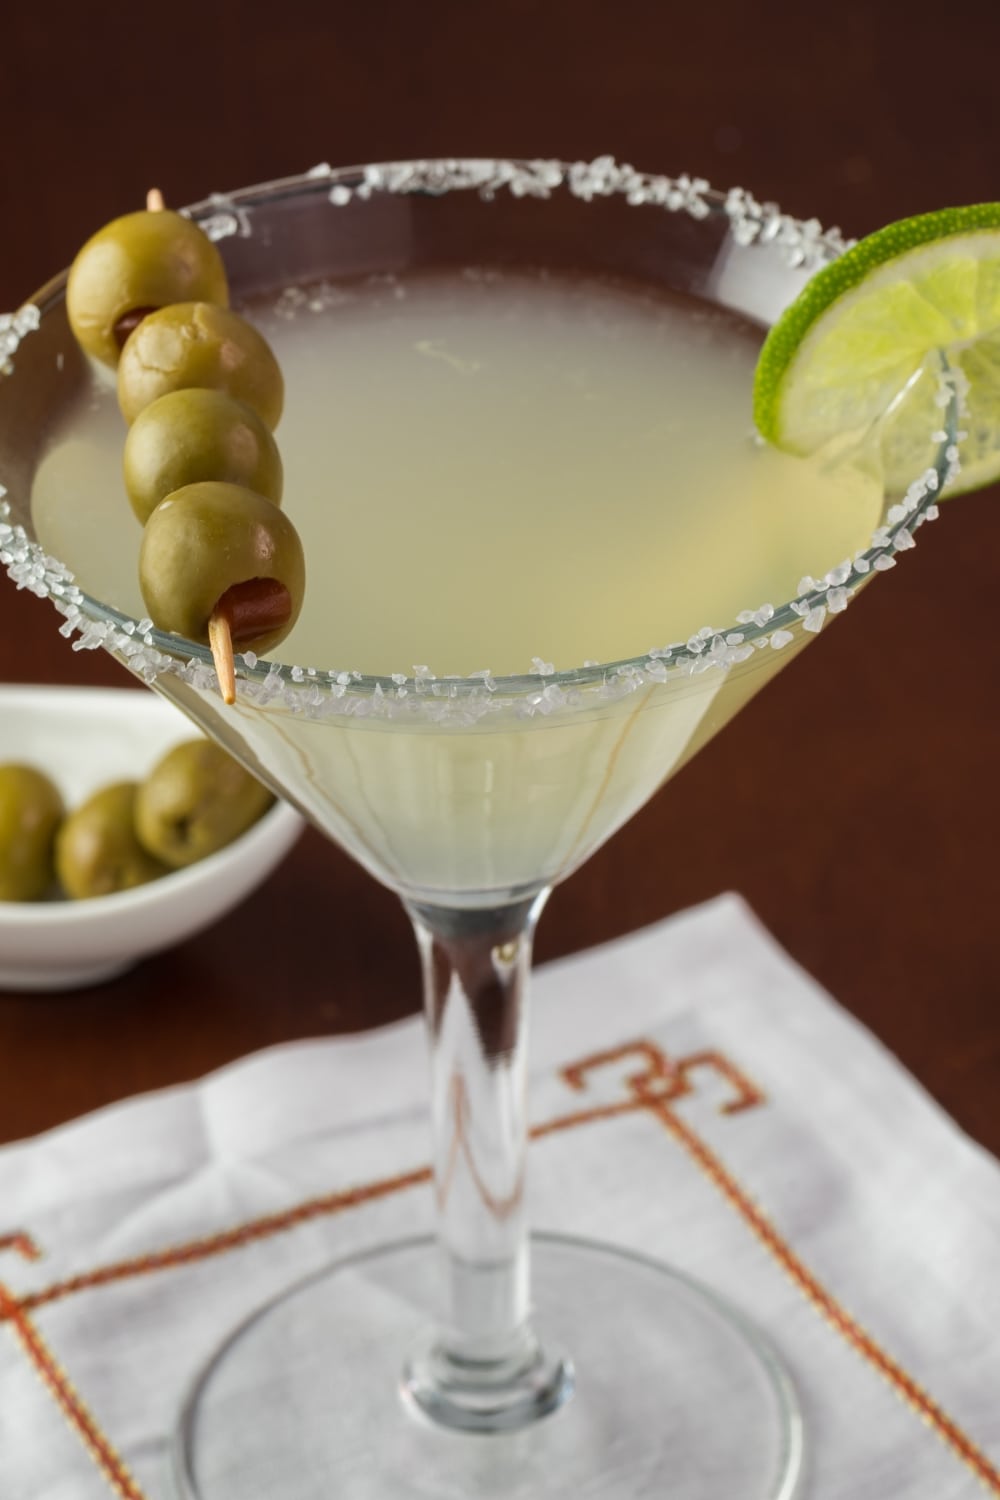 Mexican Martini Cocktail on a Glass Garnished With Olives on Stick